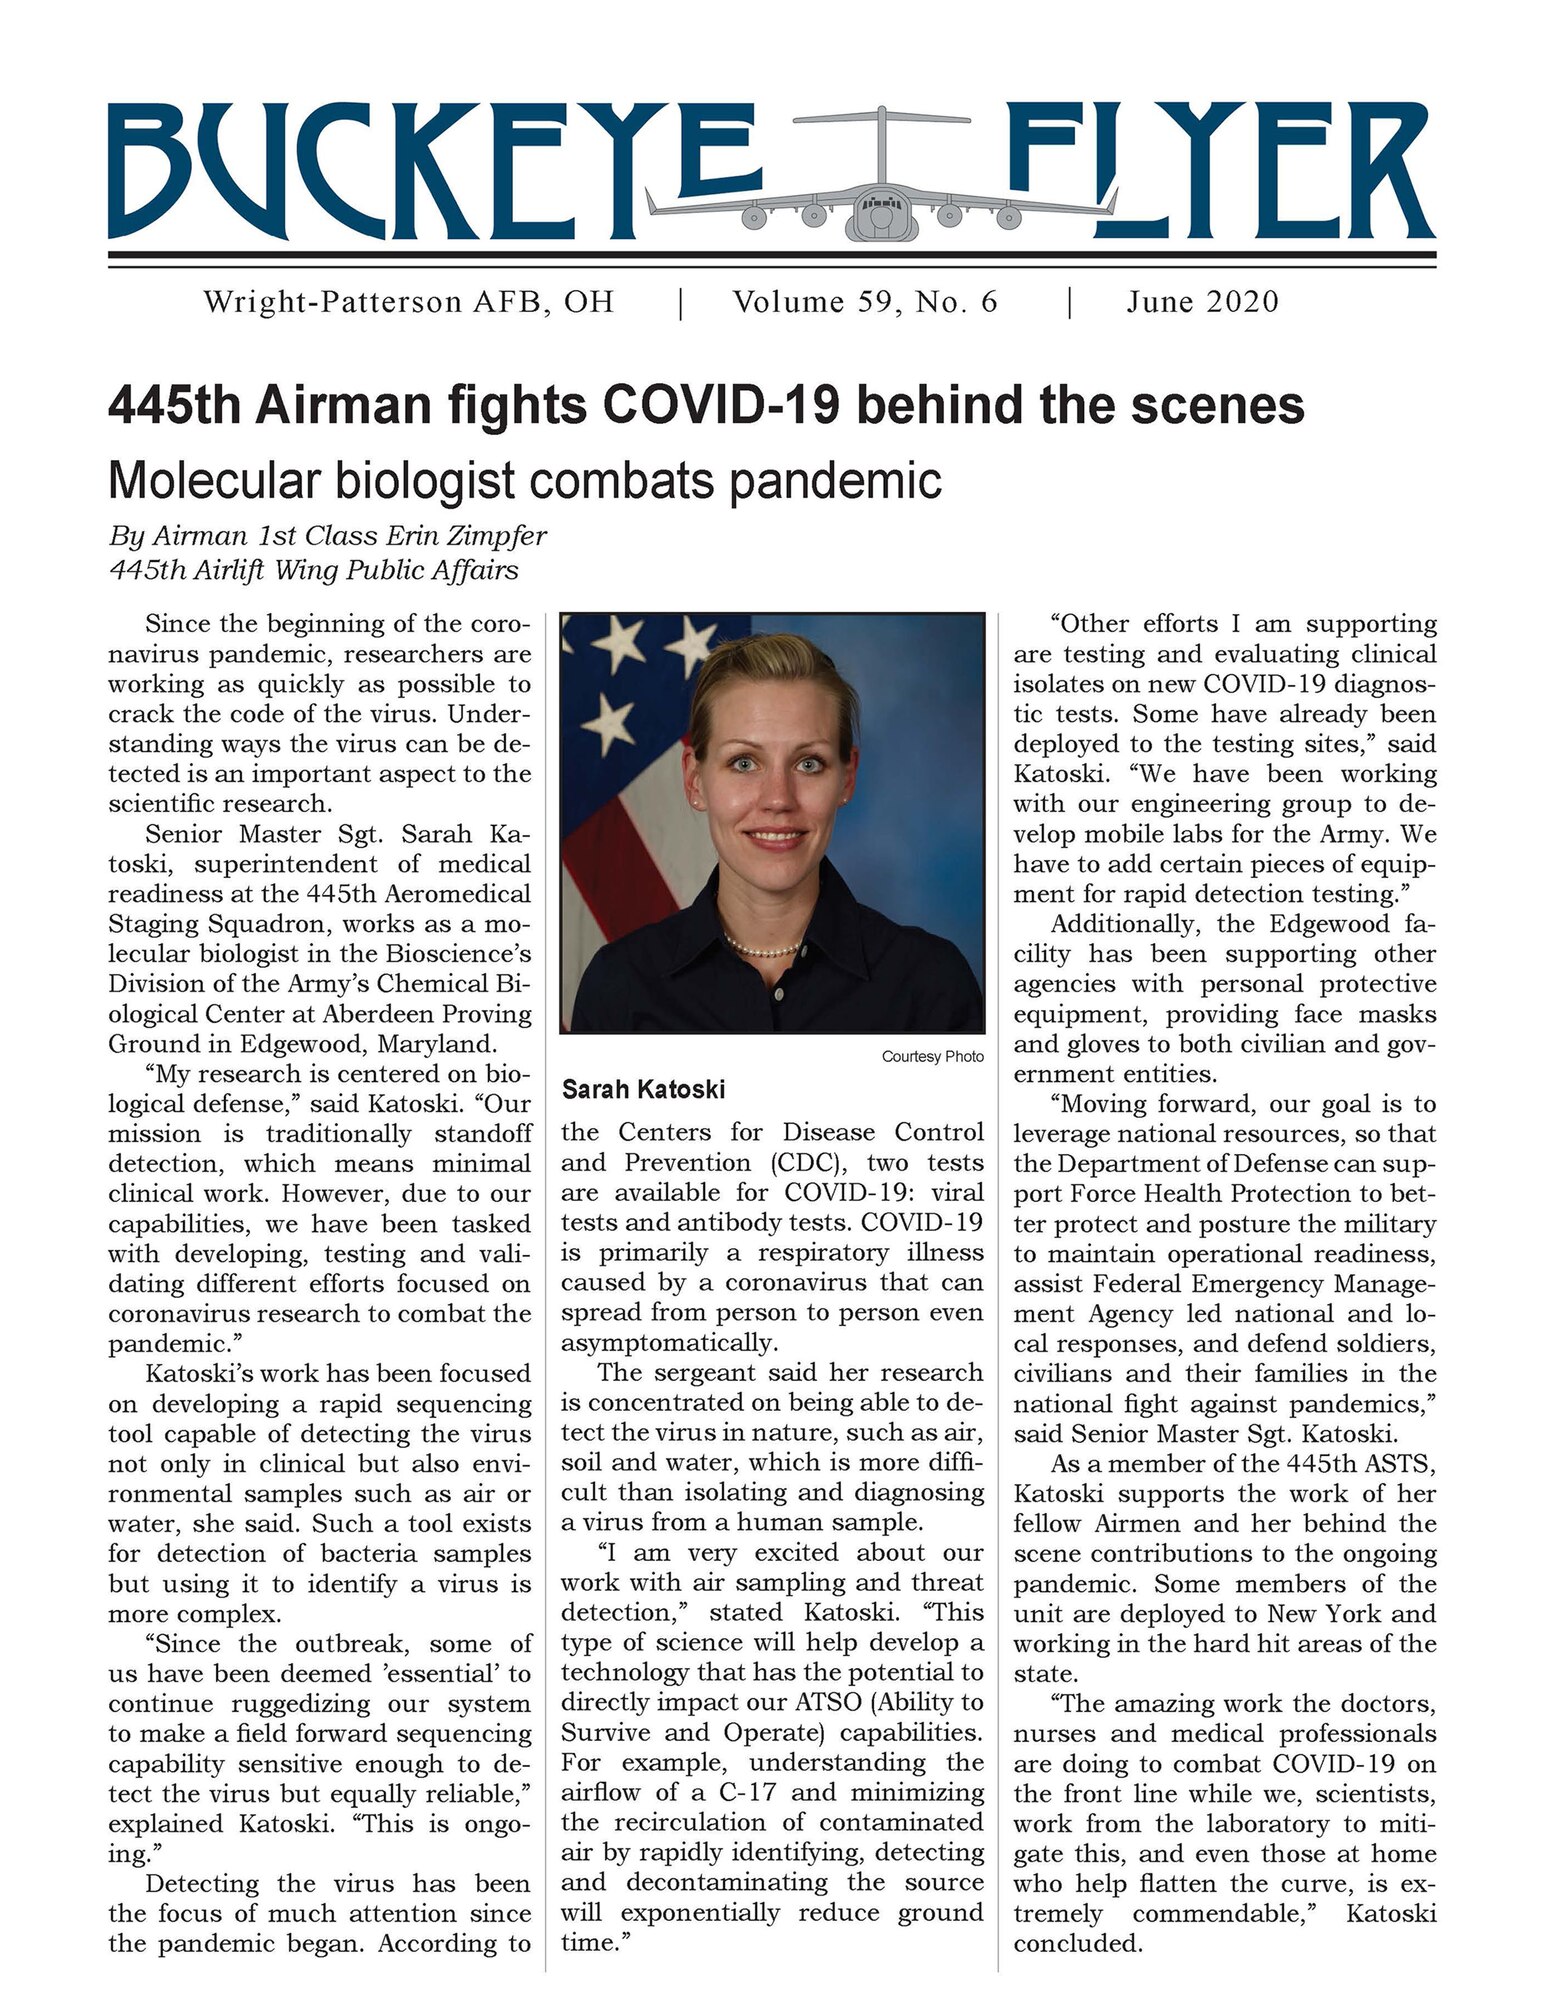 The June 2020 issue of the Buckeye Flyer is now available. The official publication of the 445th Airlift Wing includes eight pages of stories, photos and features pertaining to the 445th Airlift Wing, Air Force Reserve Command and the U.S. Air Force.